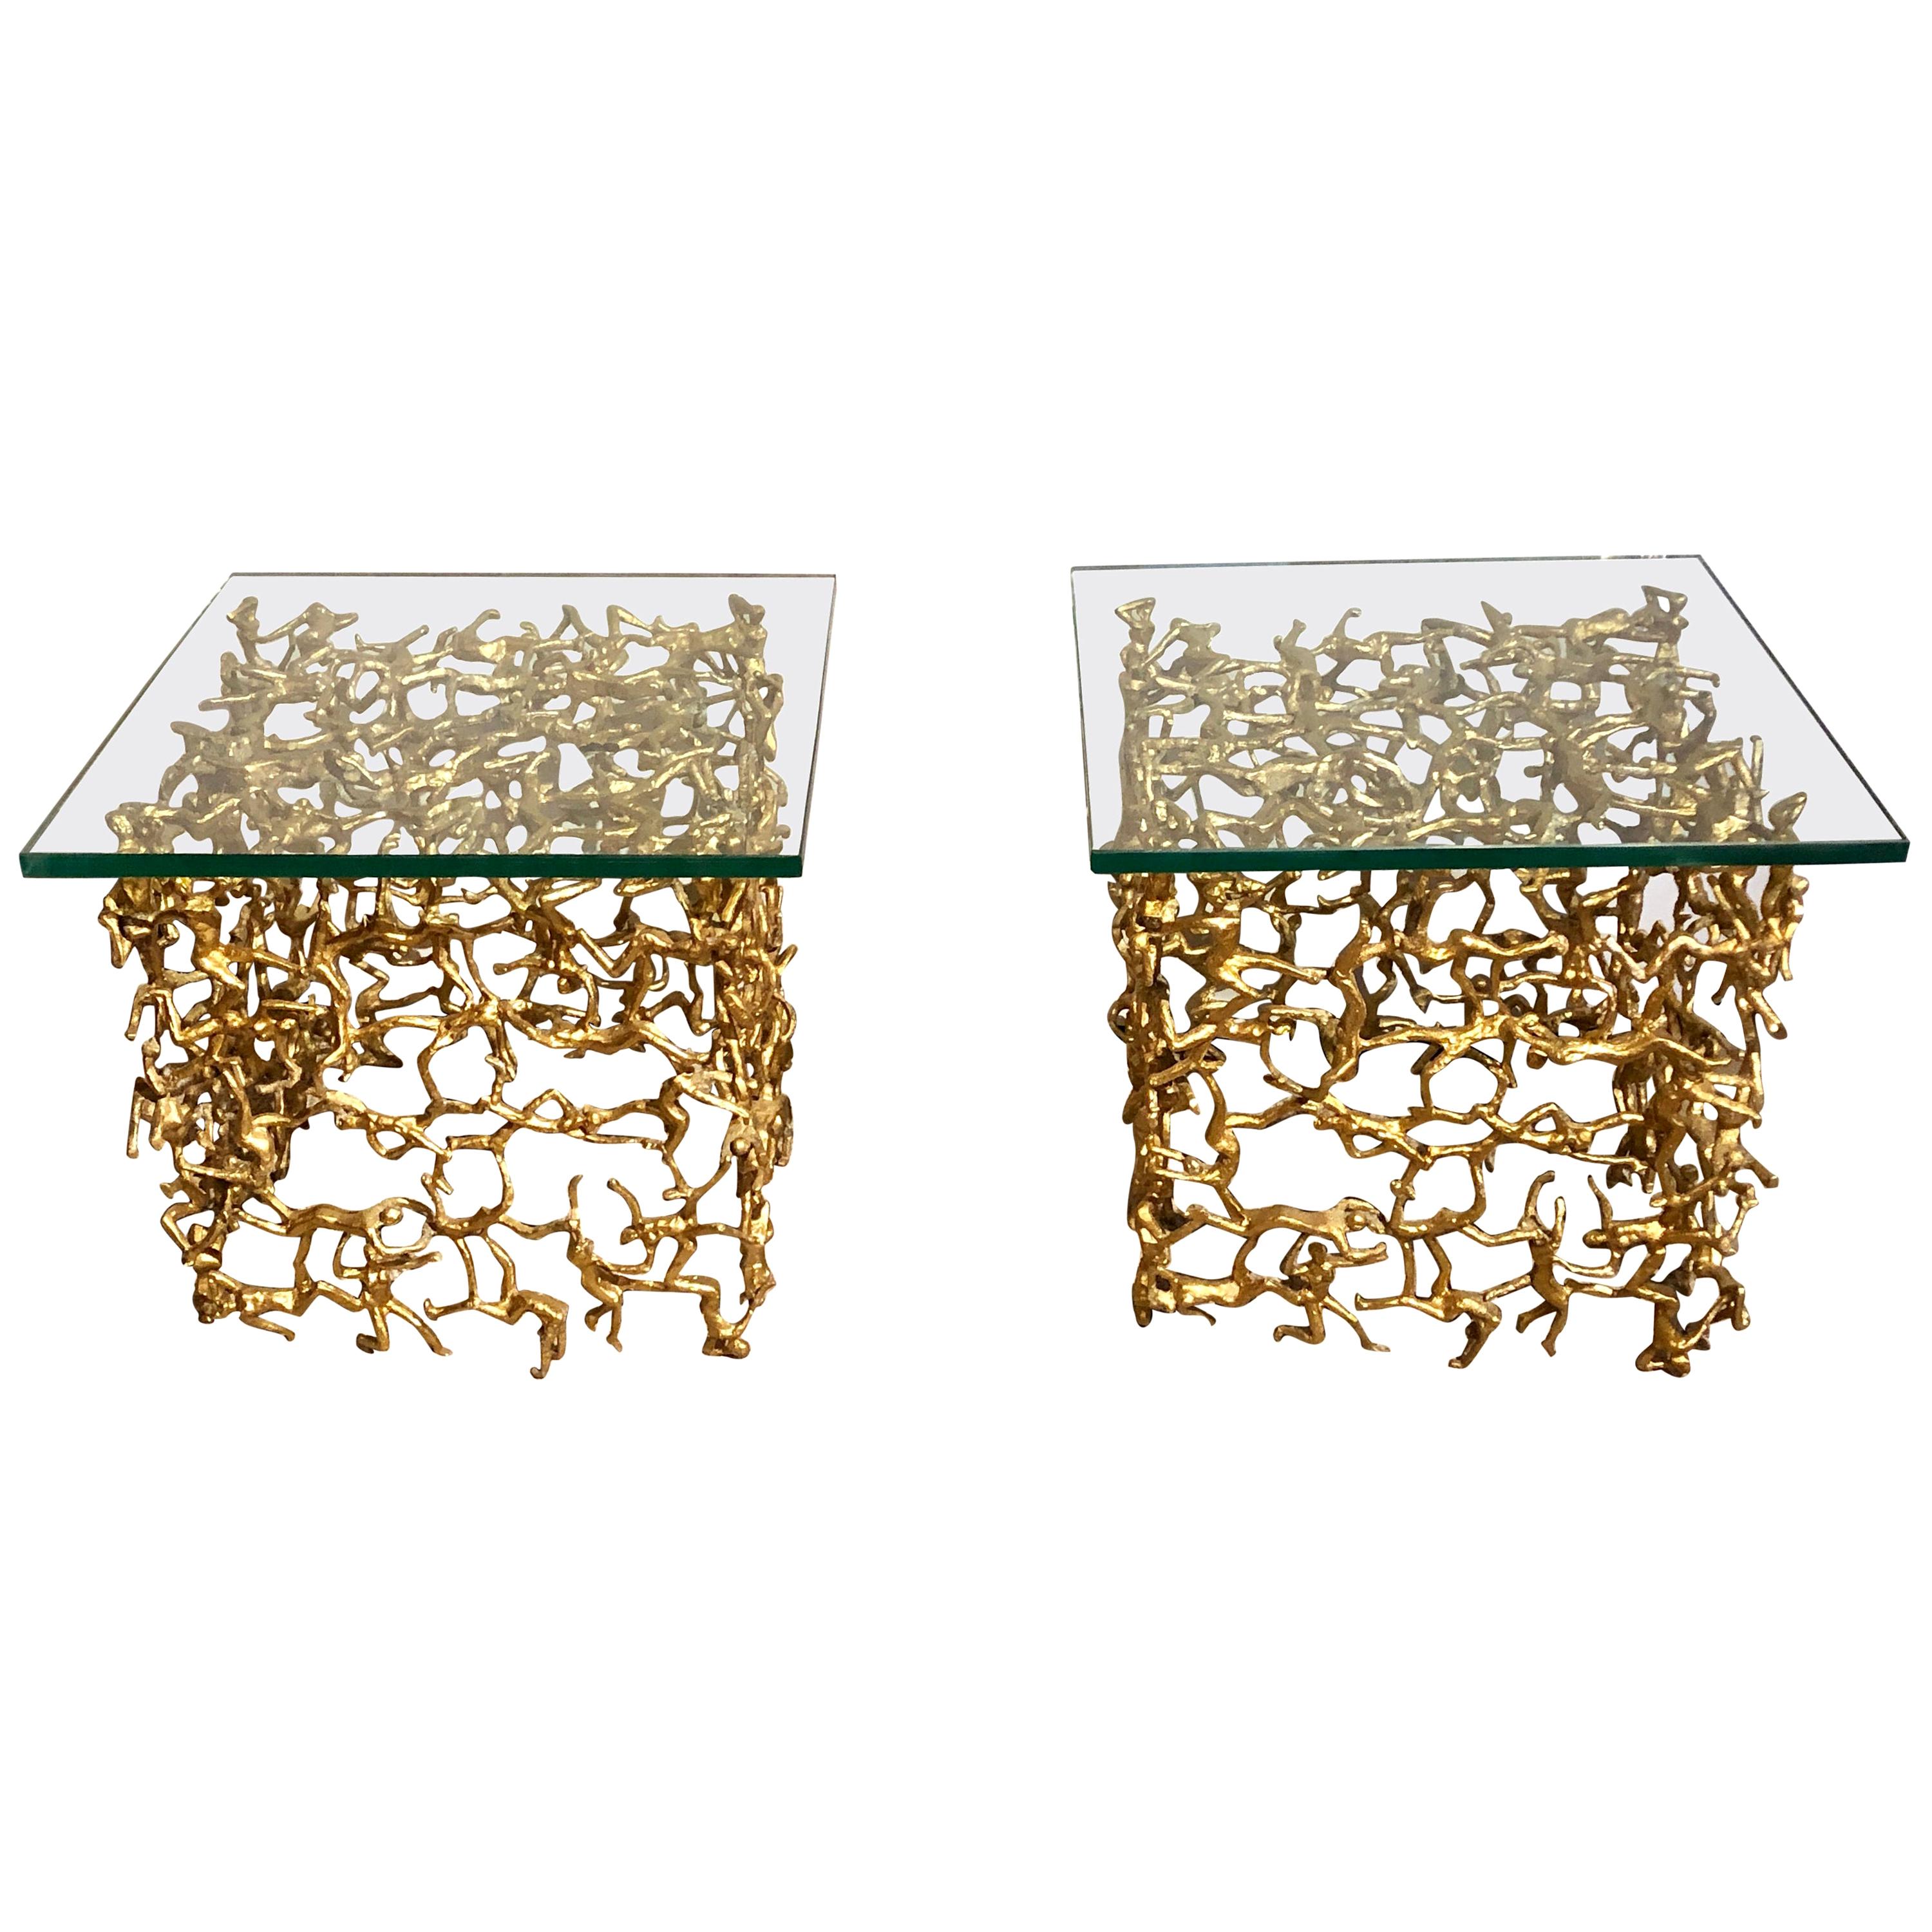 Pair of Mid-Century Modern Brass Human Figural Cube Tables or Coffee Tables